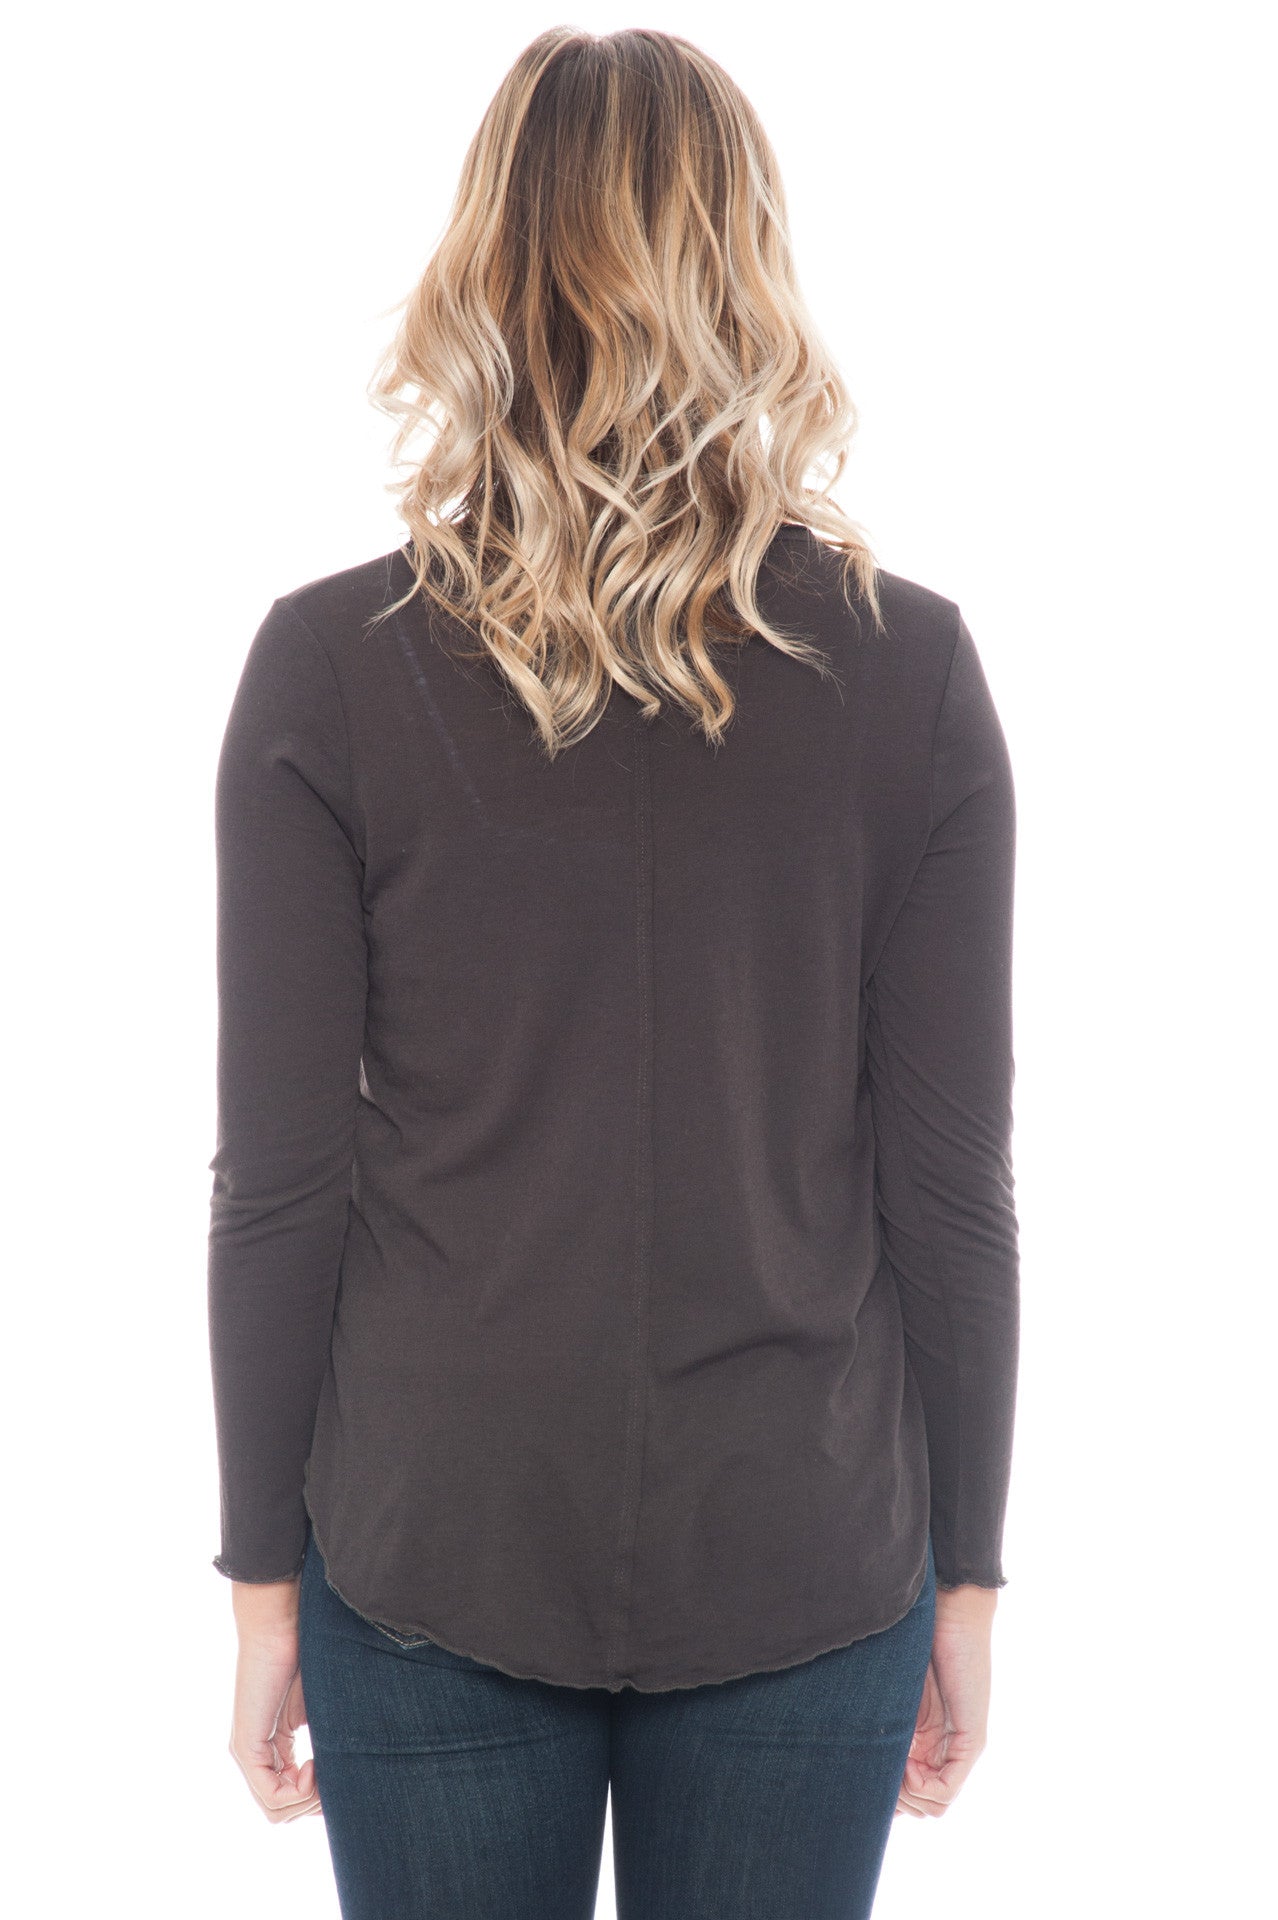 Shirt - Blame Champagne Scoop Hemline Top by Chaser